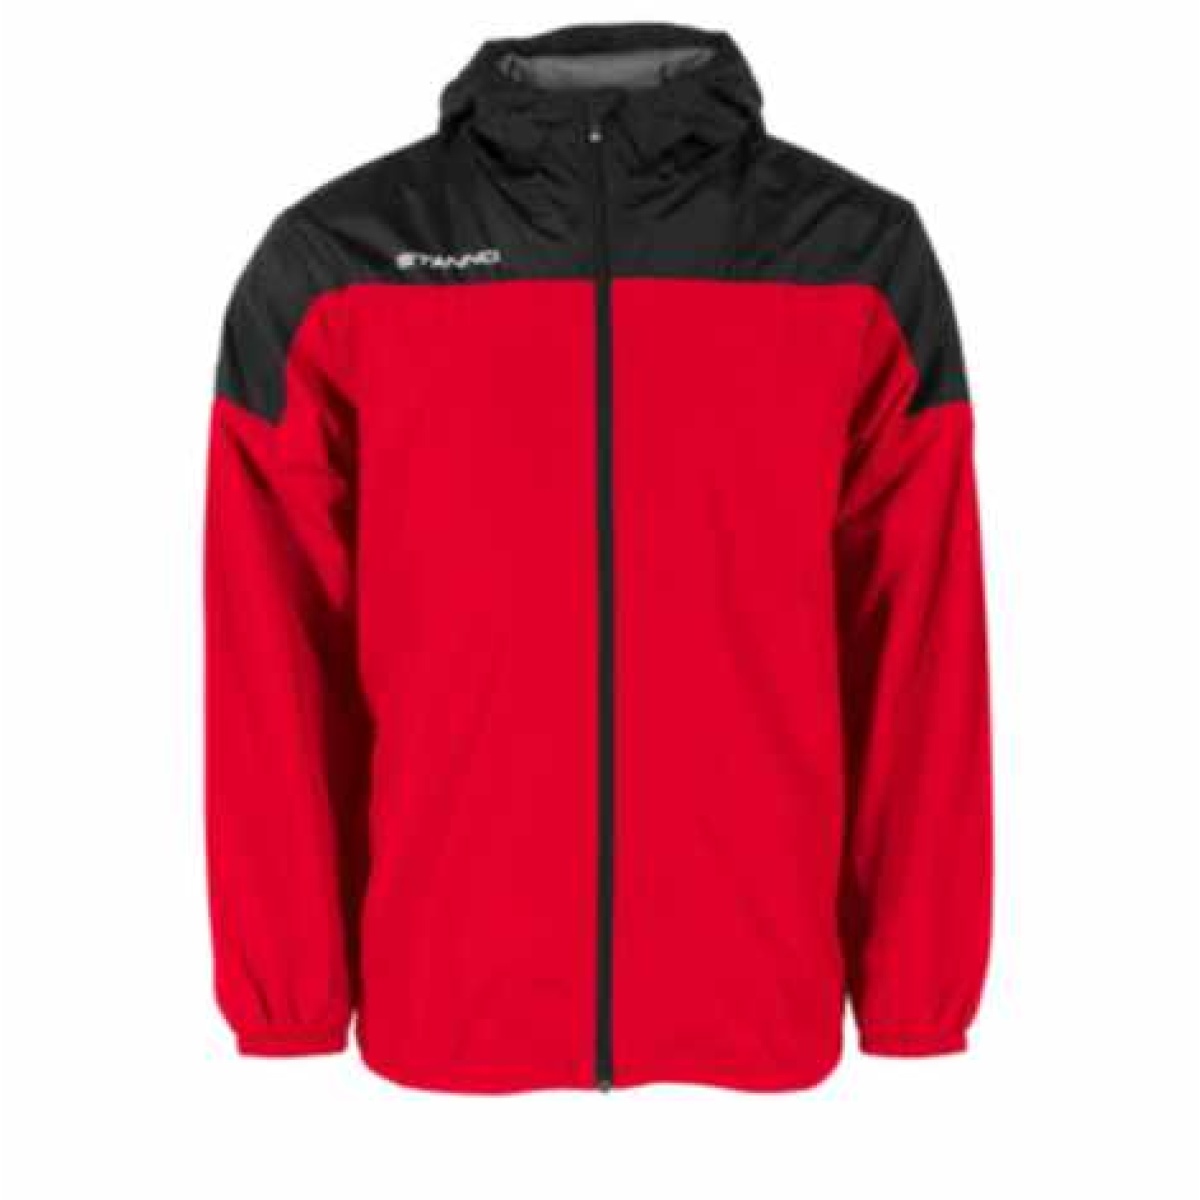 Linford Wanderers FC - Stanno Pride Rain Jacket, Custom Image Product, Linford Wanderers FC